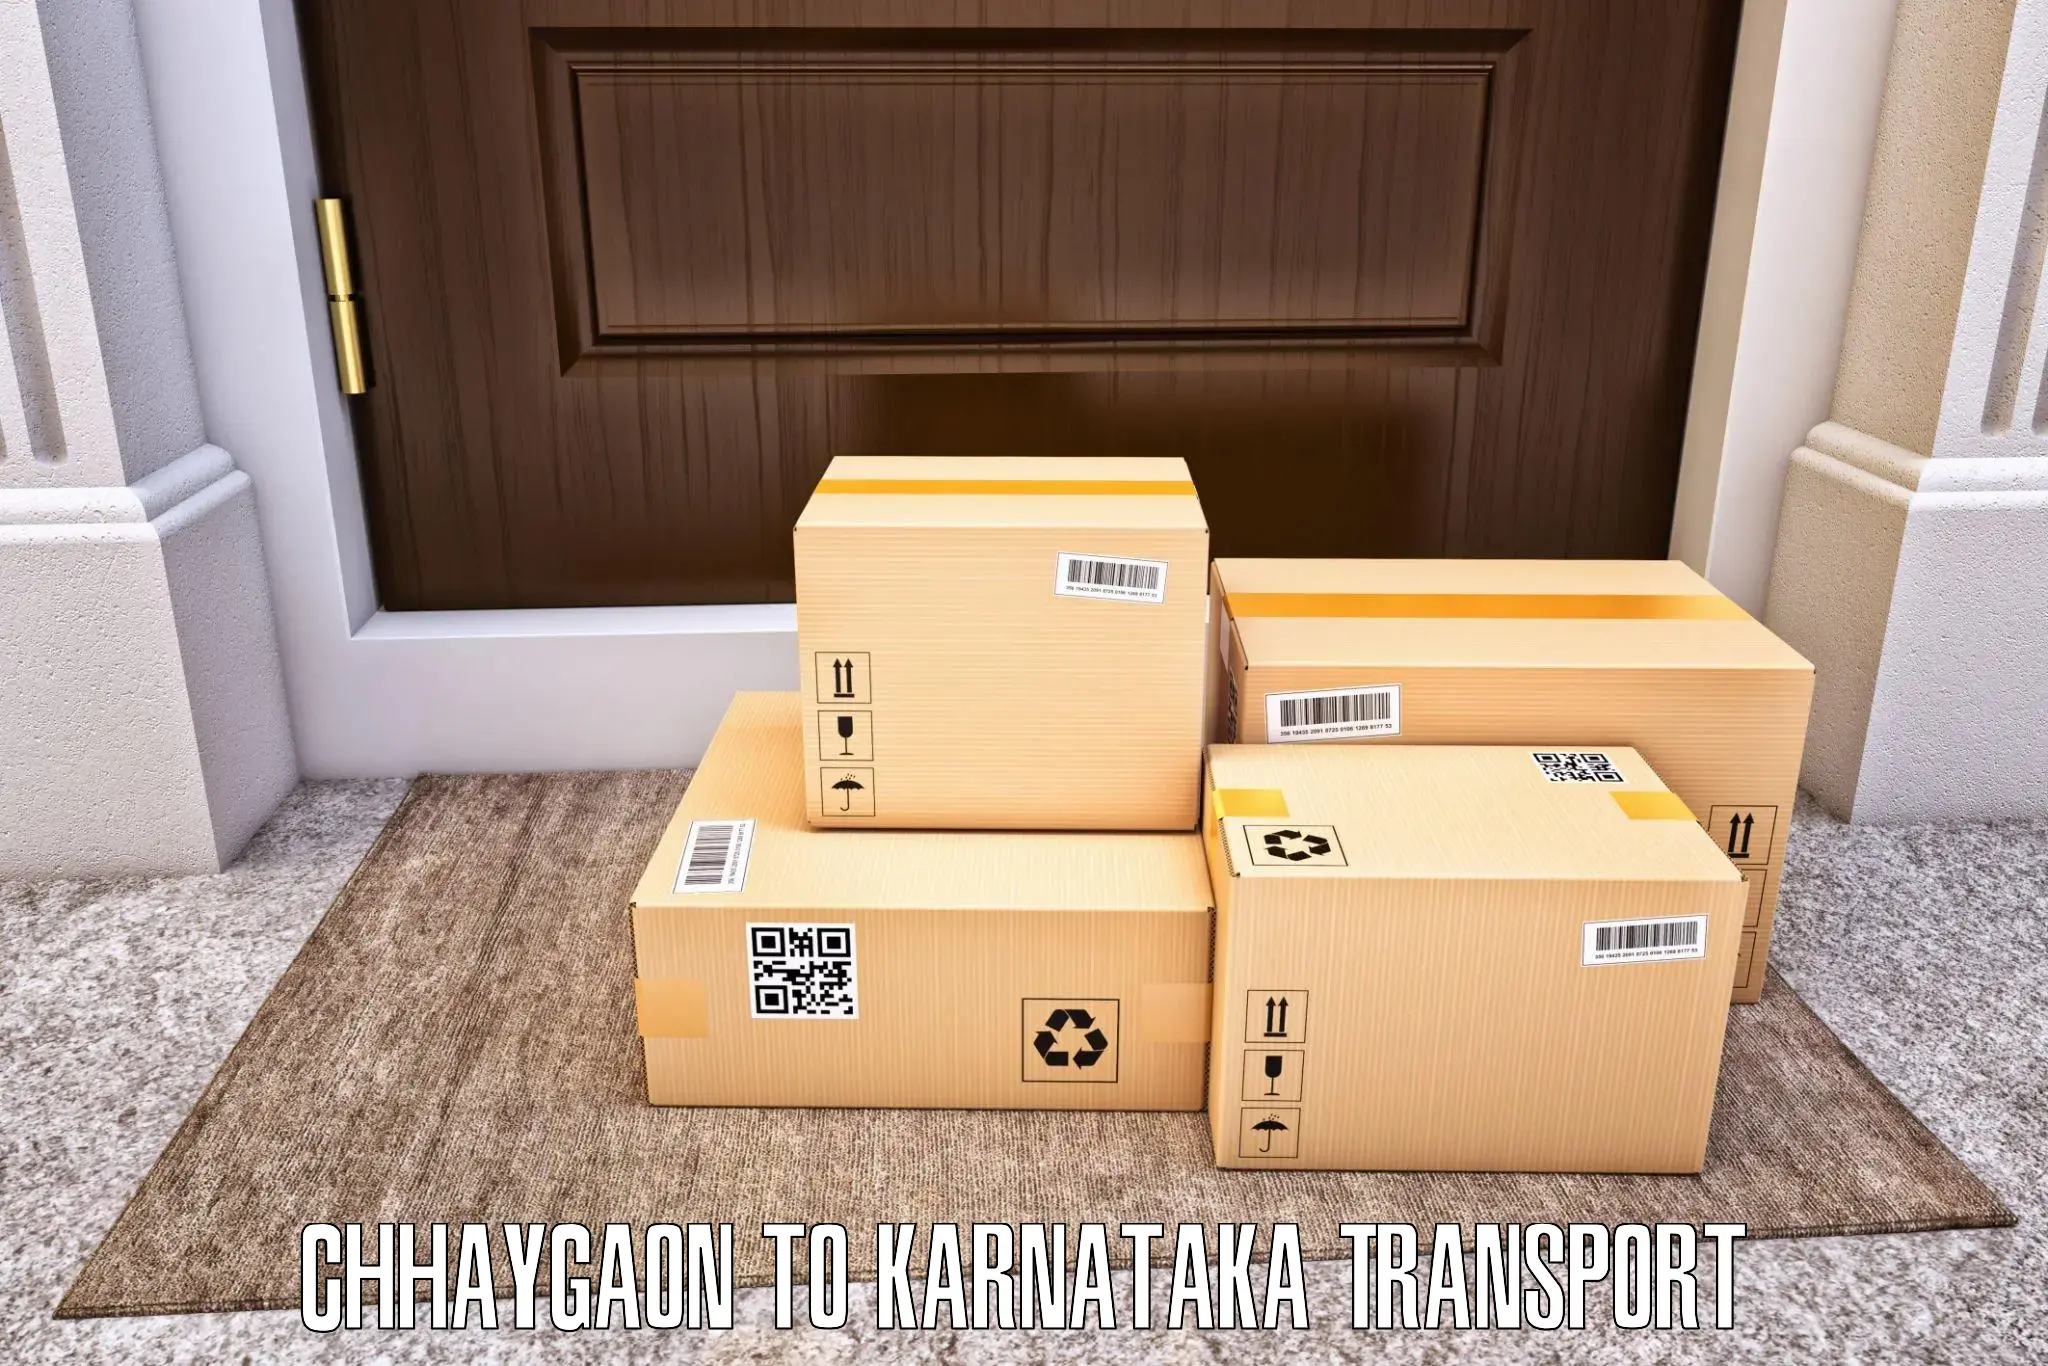 Transportation services Chhaygaon to Mangalore